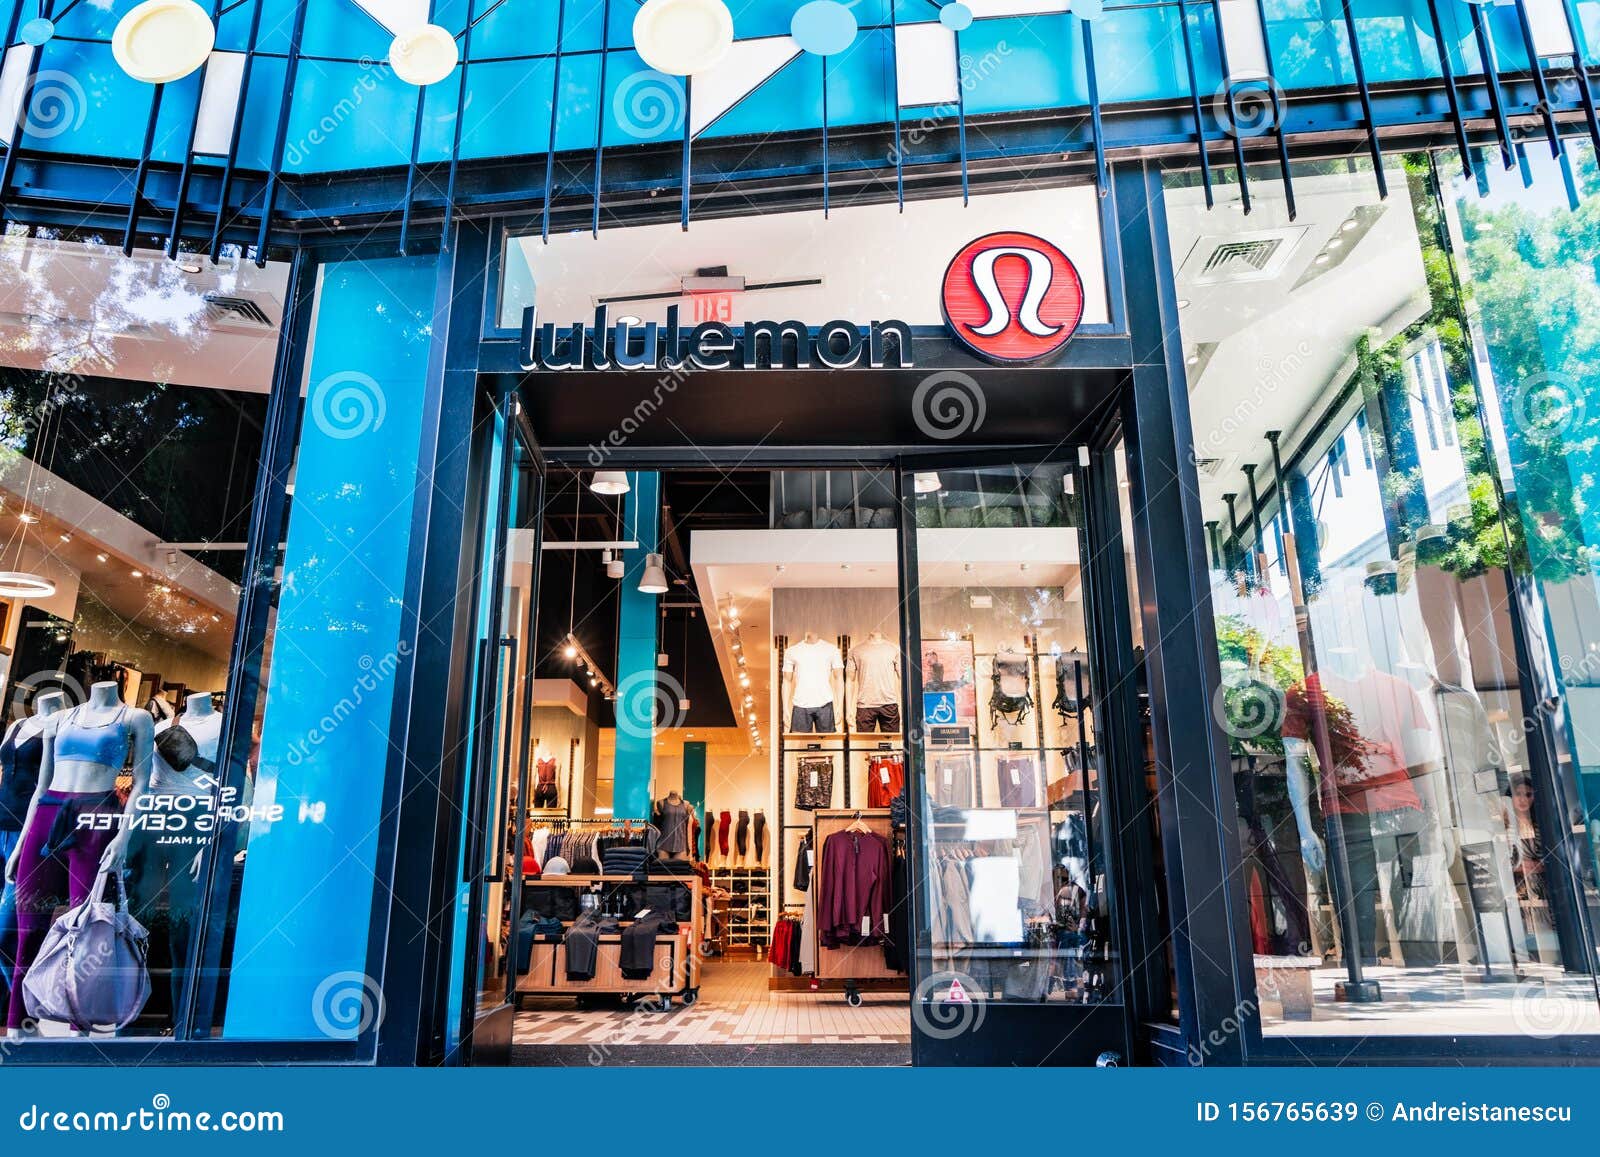 Lululemon crime spree in California grows to $135k after